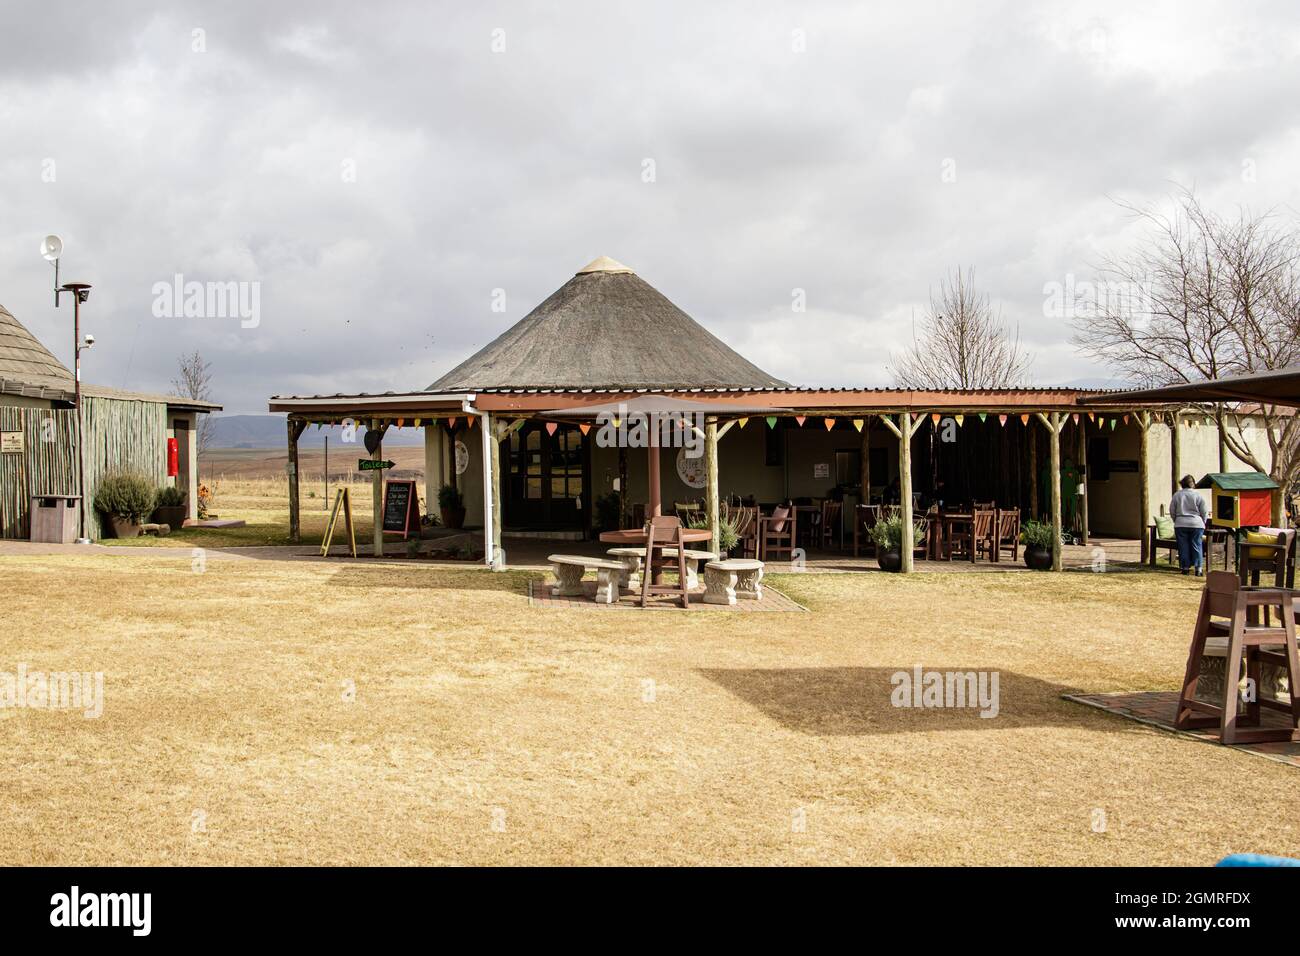 BERGVILLE, SOUTH AFRICA - Aug 30, 2021: The Farmstall restaurant alongside the road to Bergville, South Africa Stock Photo